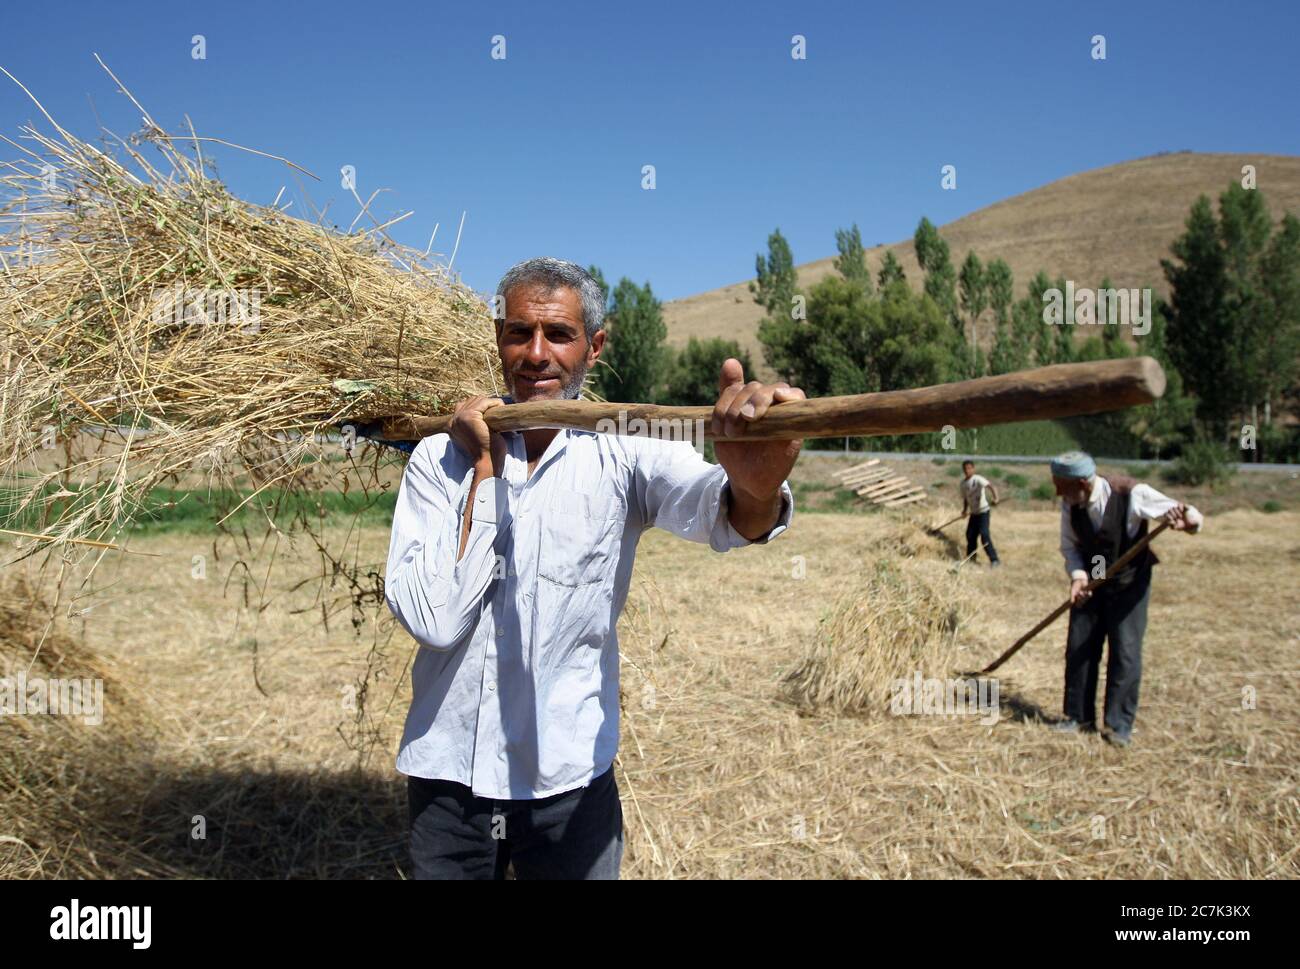 Three generations of a Kurdish farming family gather hay in a field using pitch forks in the early morning near Tatvan in the far east of Turkey. Stock Photo